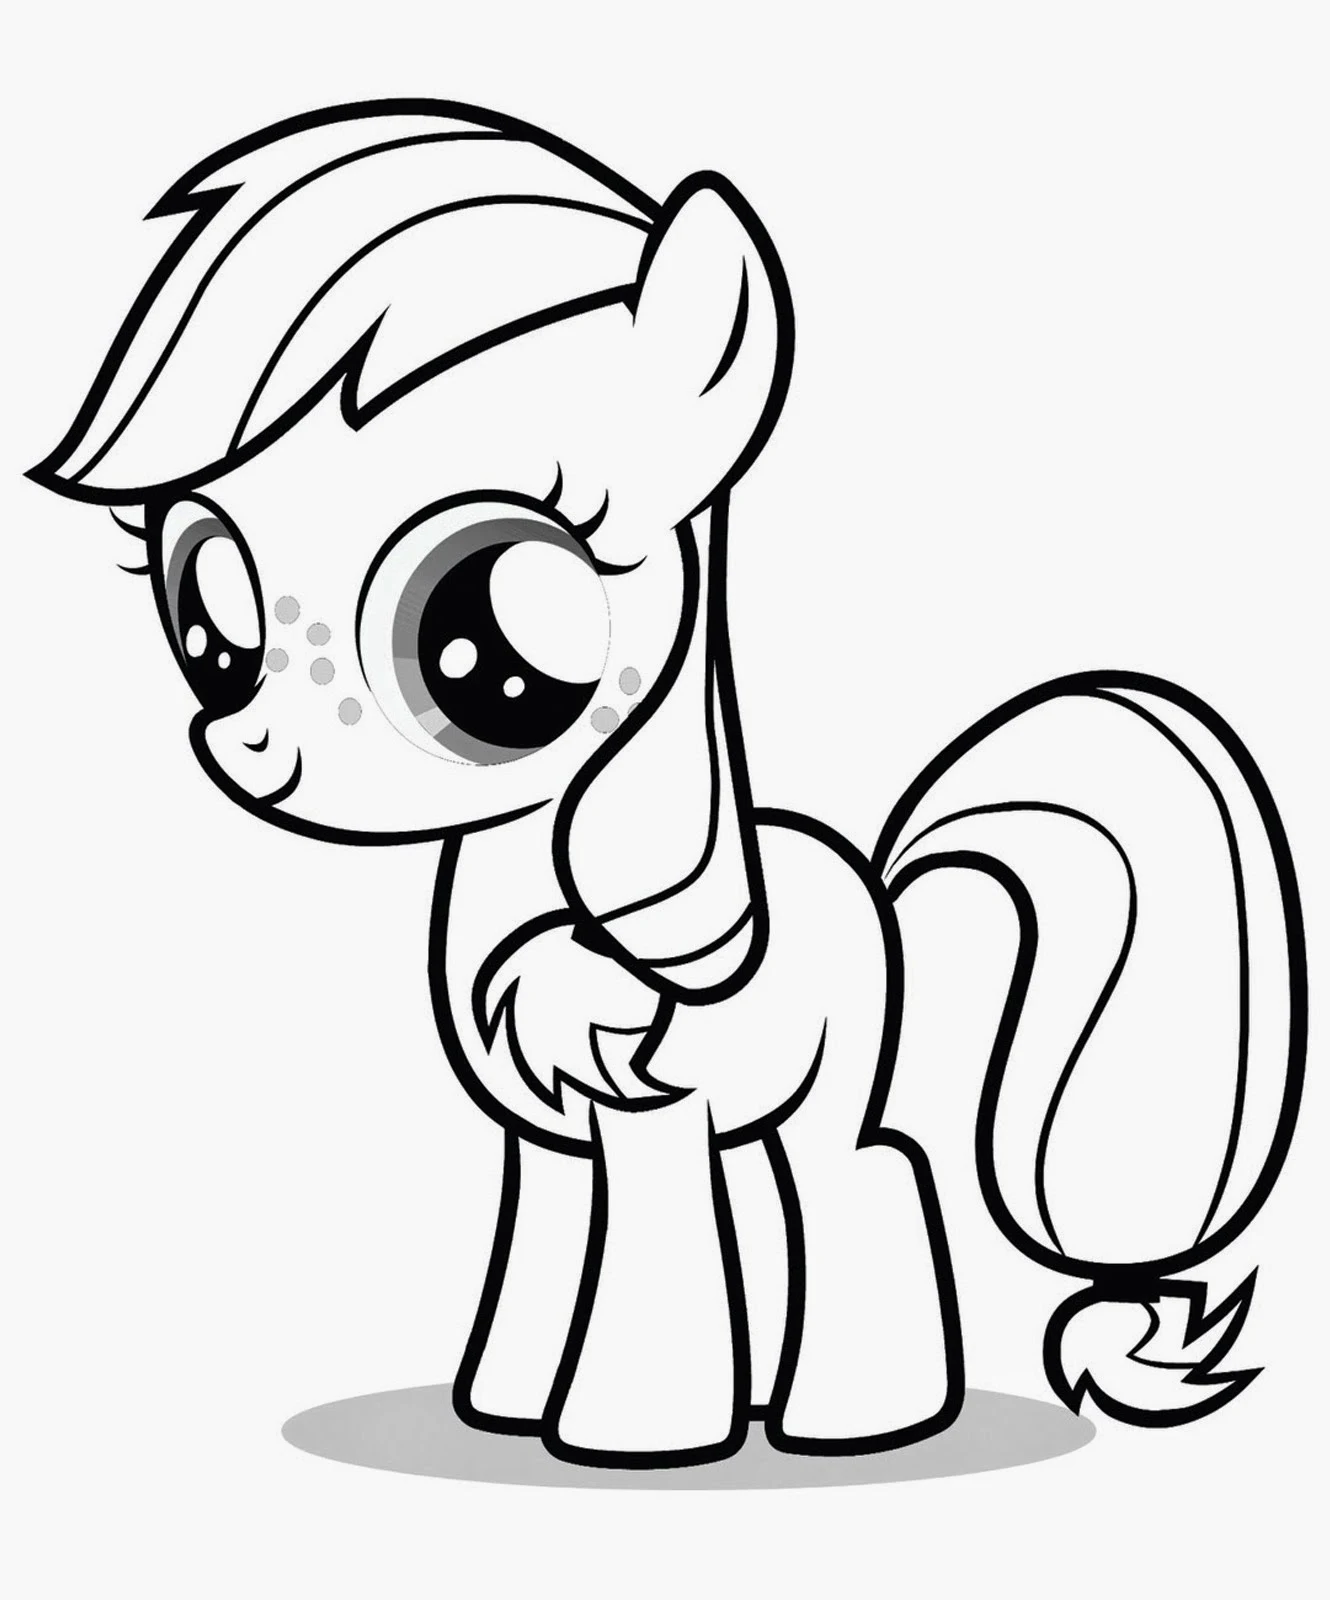 Coloring Pages My Little Pony Coloring Pages Free and Printable